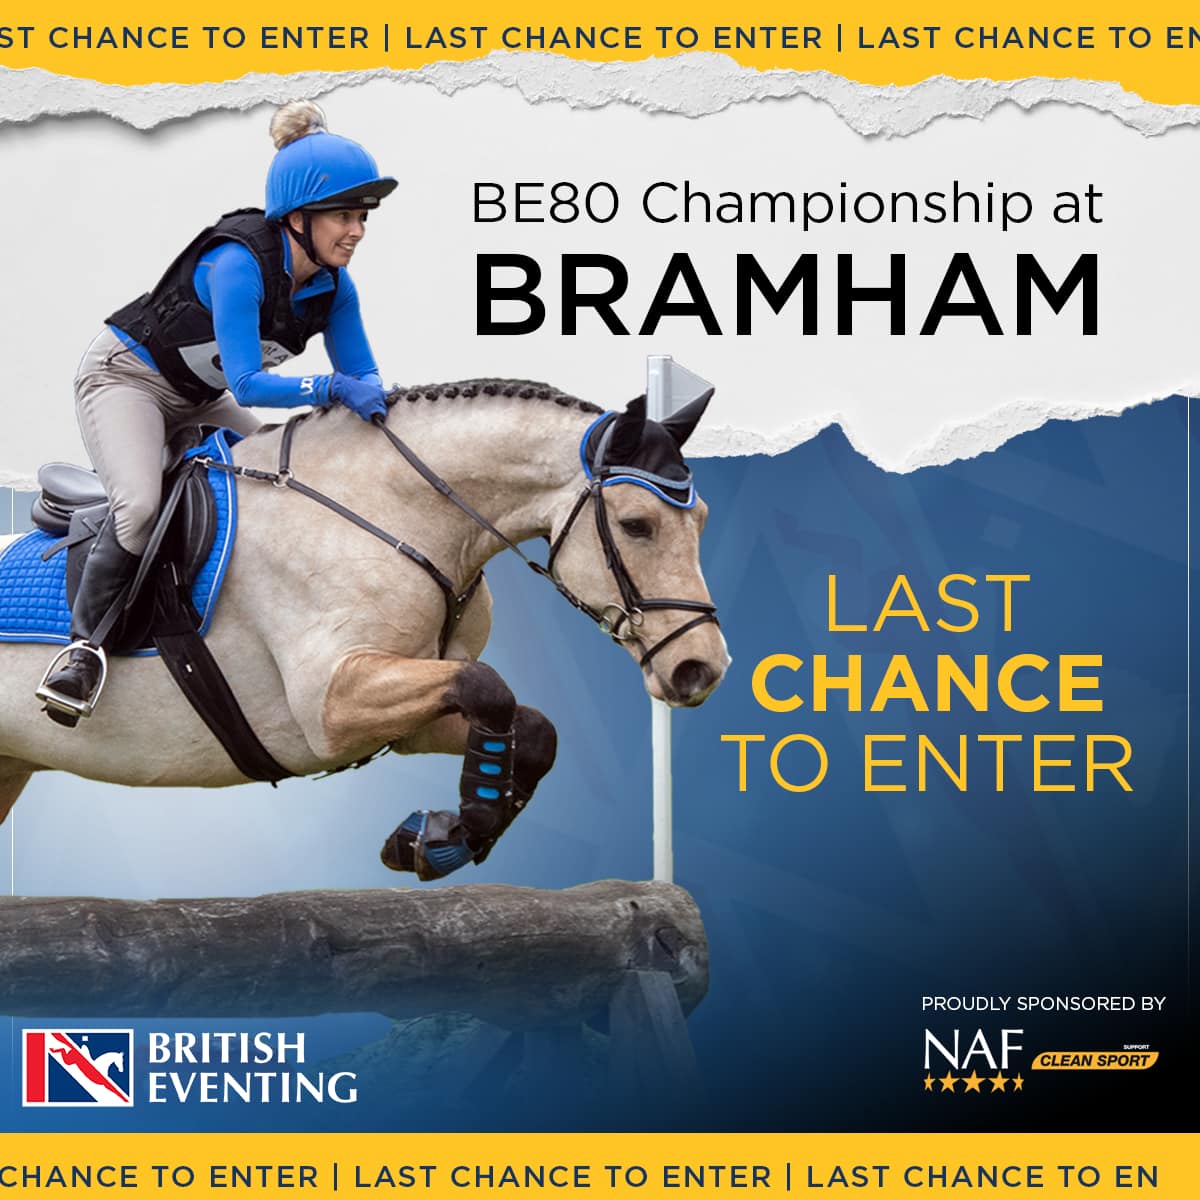 Entries for the NAF Five Star @BEventing BE80 Championships at @BramhamPark will officially close this Friday (27th May). If you've qualified, get your entry in to make sure that you don't miss out on your chance to compete at this iconic venue. Visit bit.ly/3akm1rg!